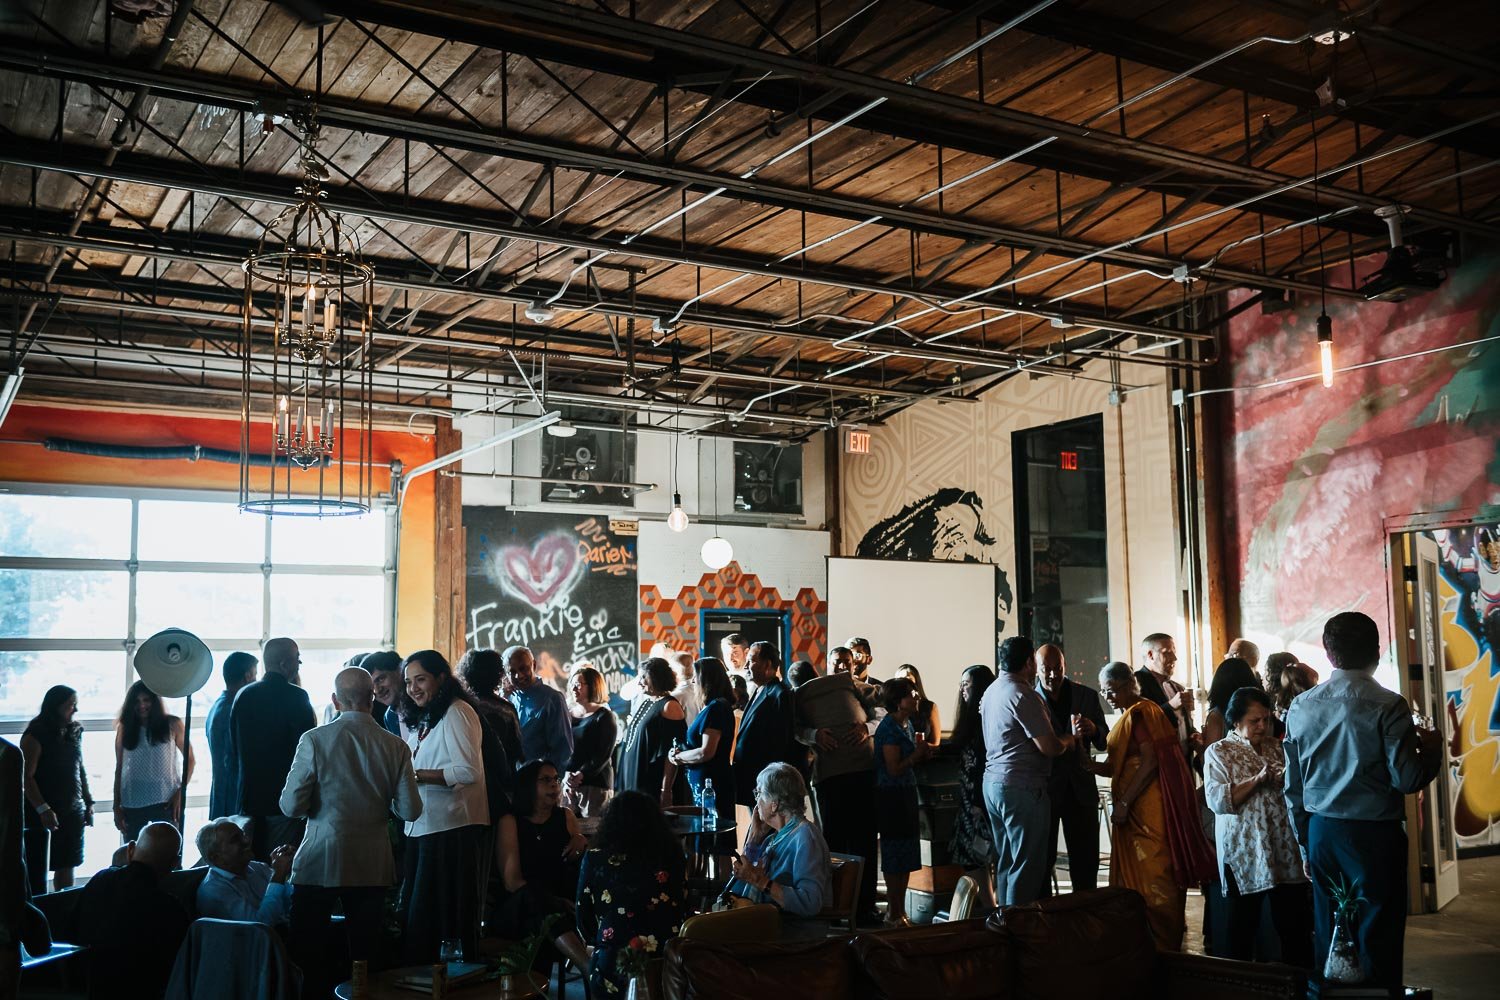 Guests mingle at The Infinite Monkey Theorem in Austin Texas